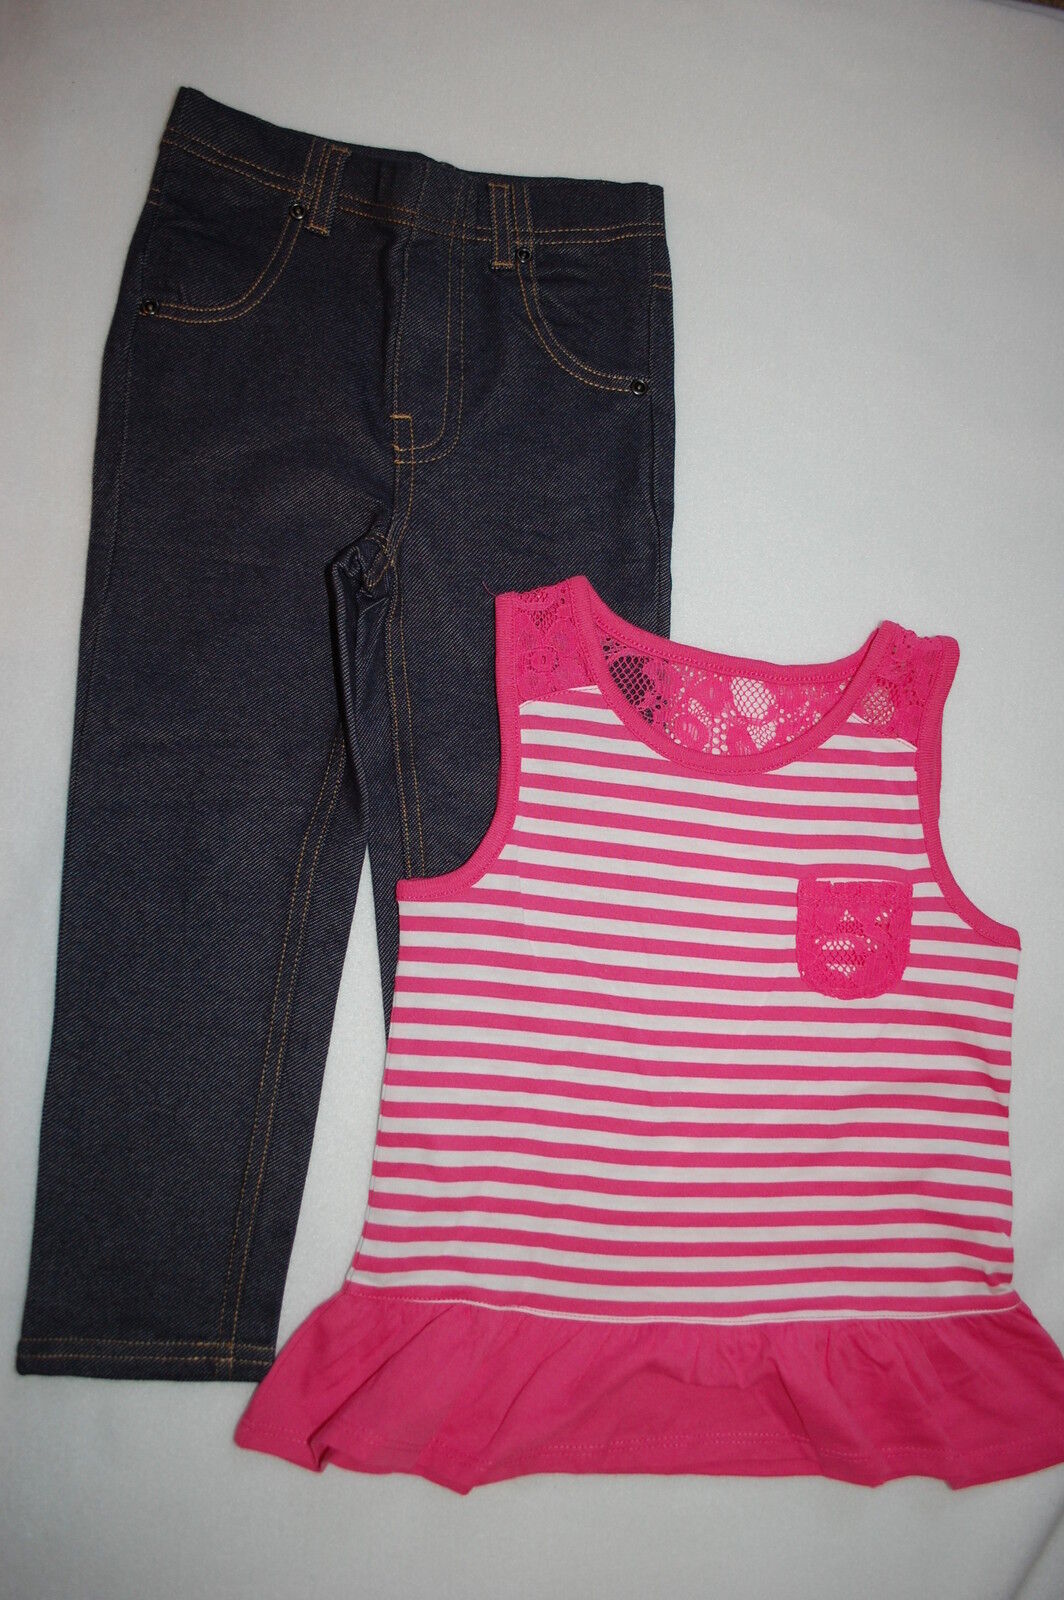 Toddler Over item handling ☆ Girls Outfit PINK WHITE STRIPED TANK PANEL Jeggings Blue 4T TOP w Under blast sales LACE